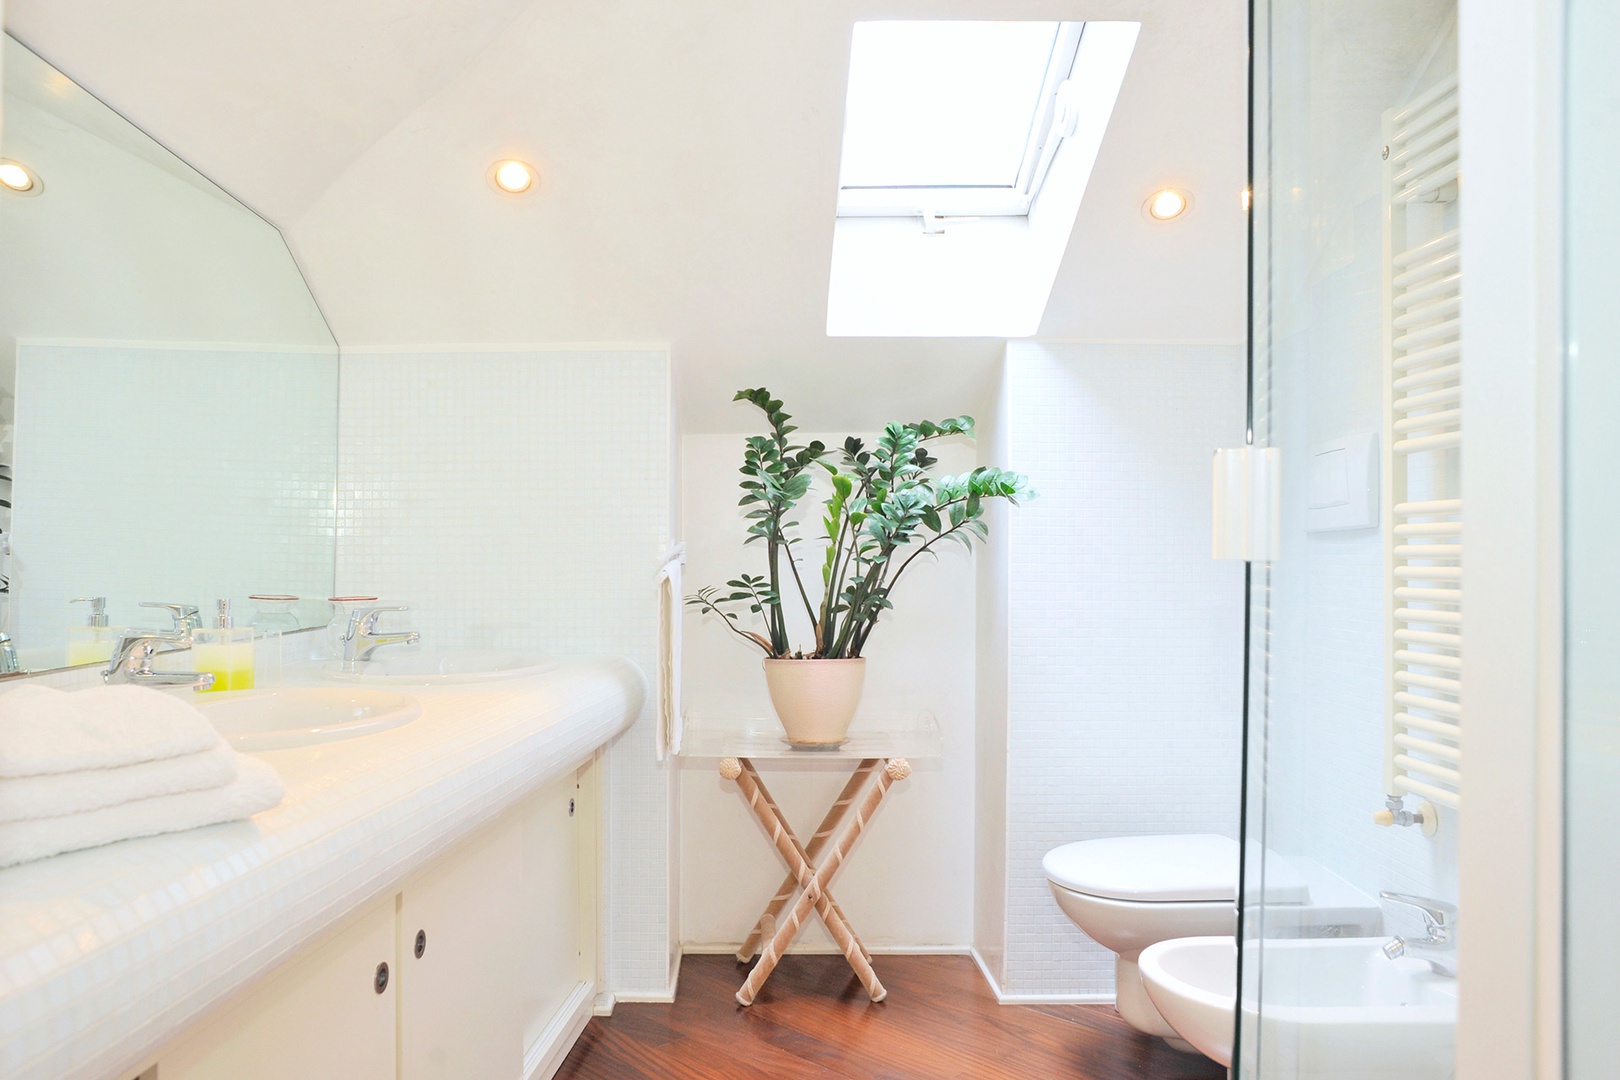 The compact bathroom with a double sink and a skylight that brightens.